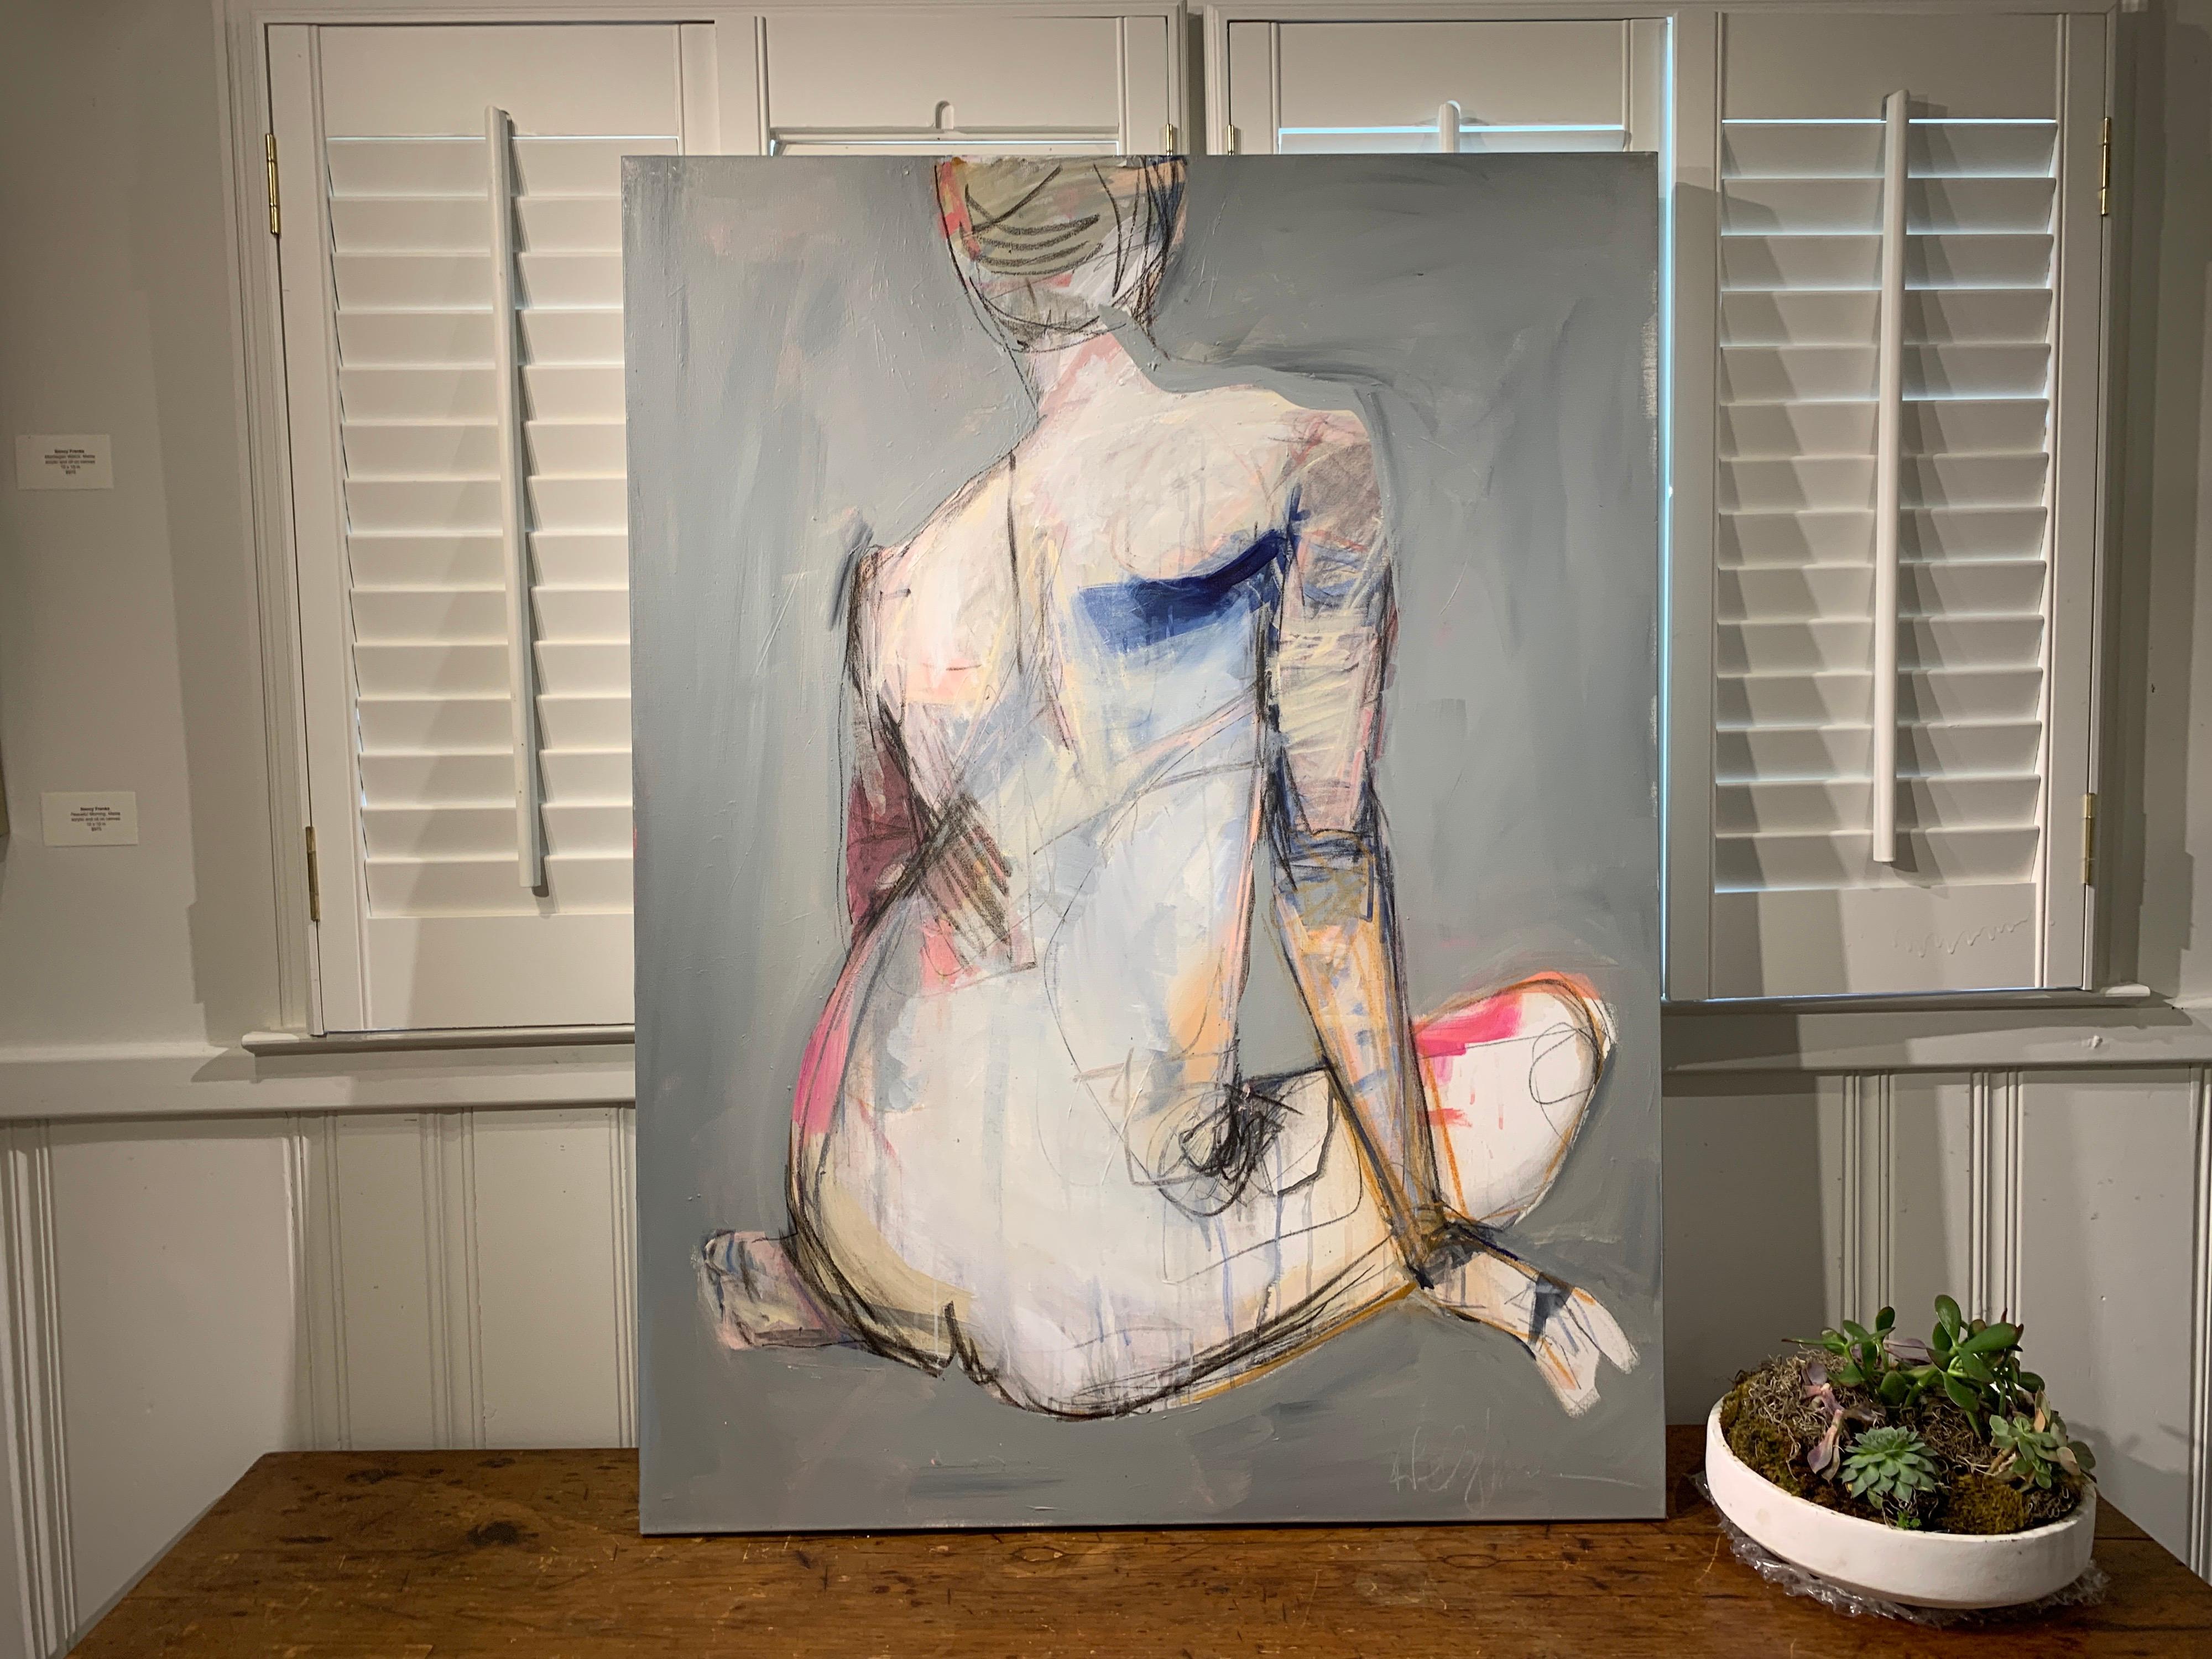 'Still' is a medium size mixed media on canvas abstracted nude painting created by American artist Kelley Ogburn in 2020. Featuring a palette made of blue, grey, white, black and pink tones, this painting draws our attention with its bold and